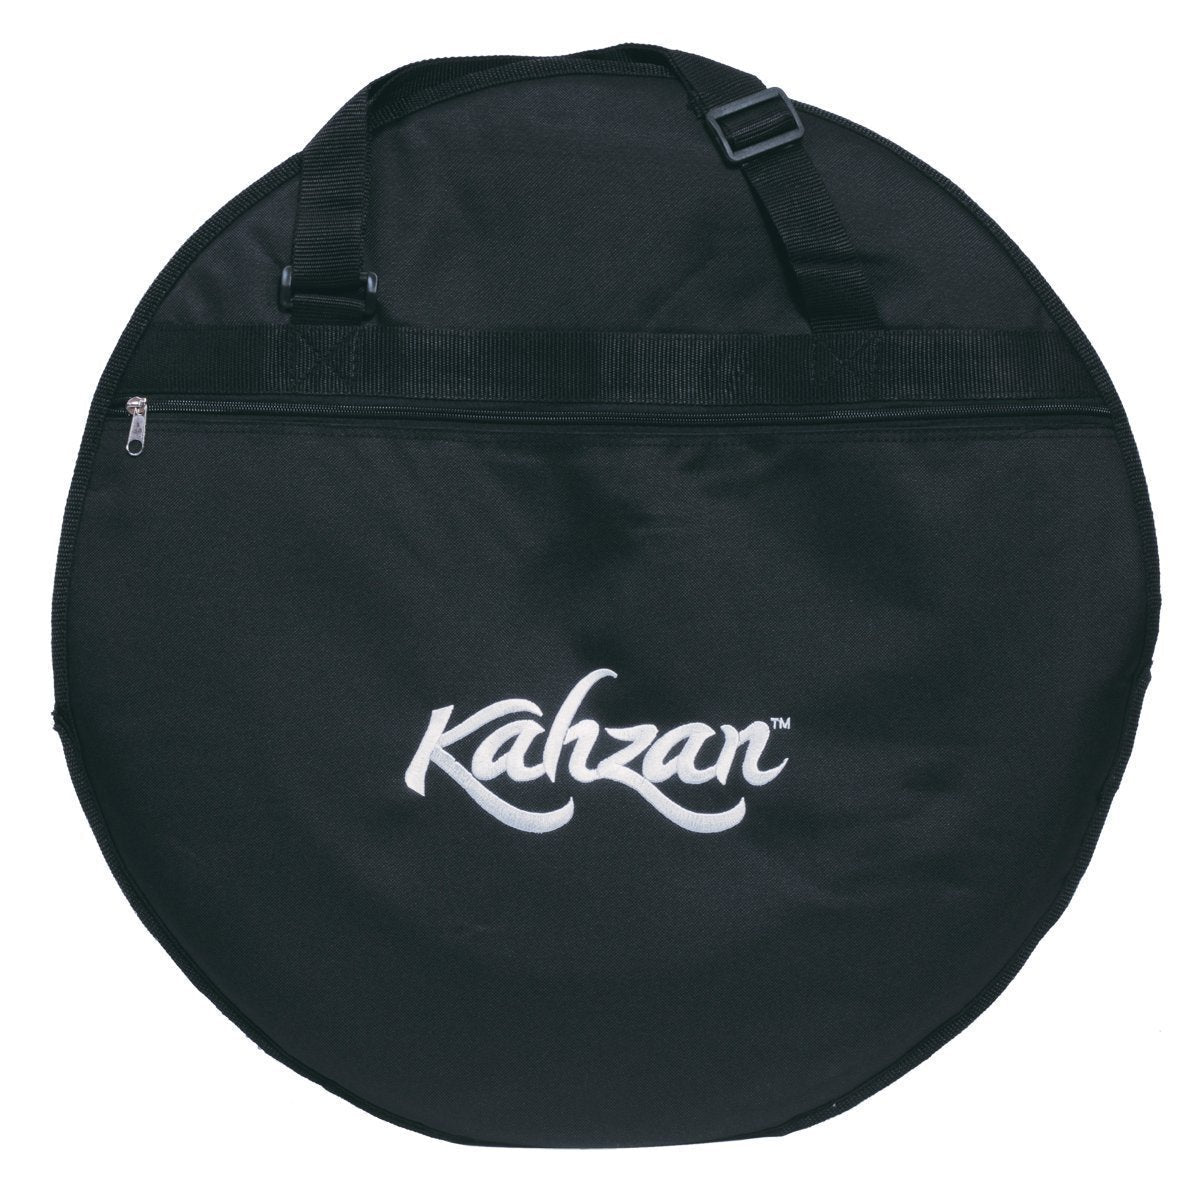 Load image into Gallery viewer, Kahzan &amp;#39;Vintage Series&amp;#39; Cymbal Pack (14&amp;quot;/16&amp;quot;/20&amp;quot;)
